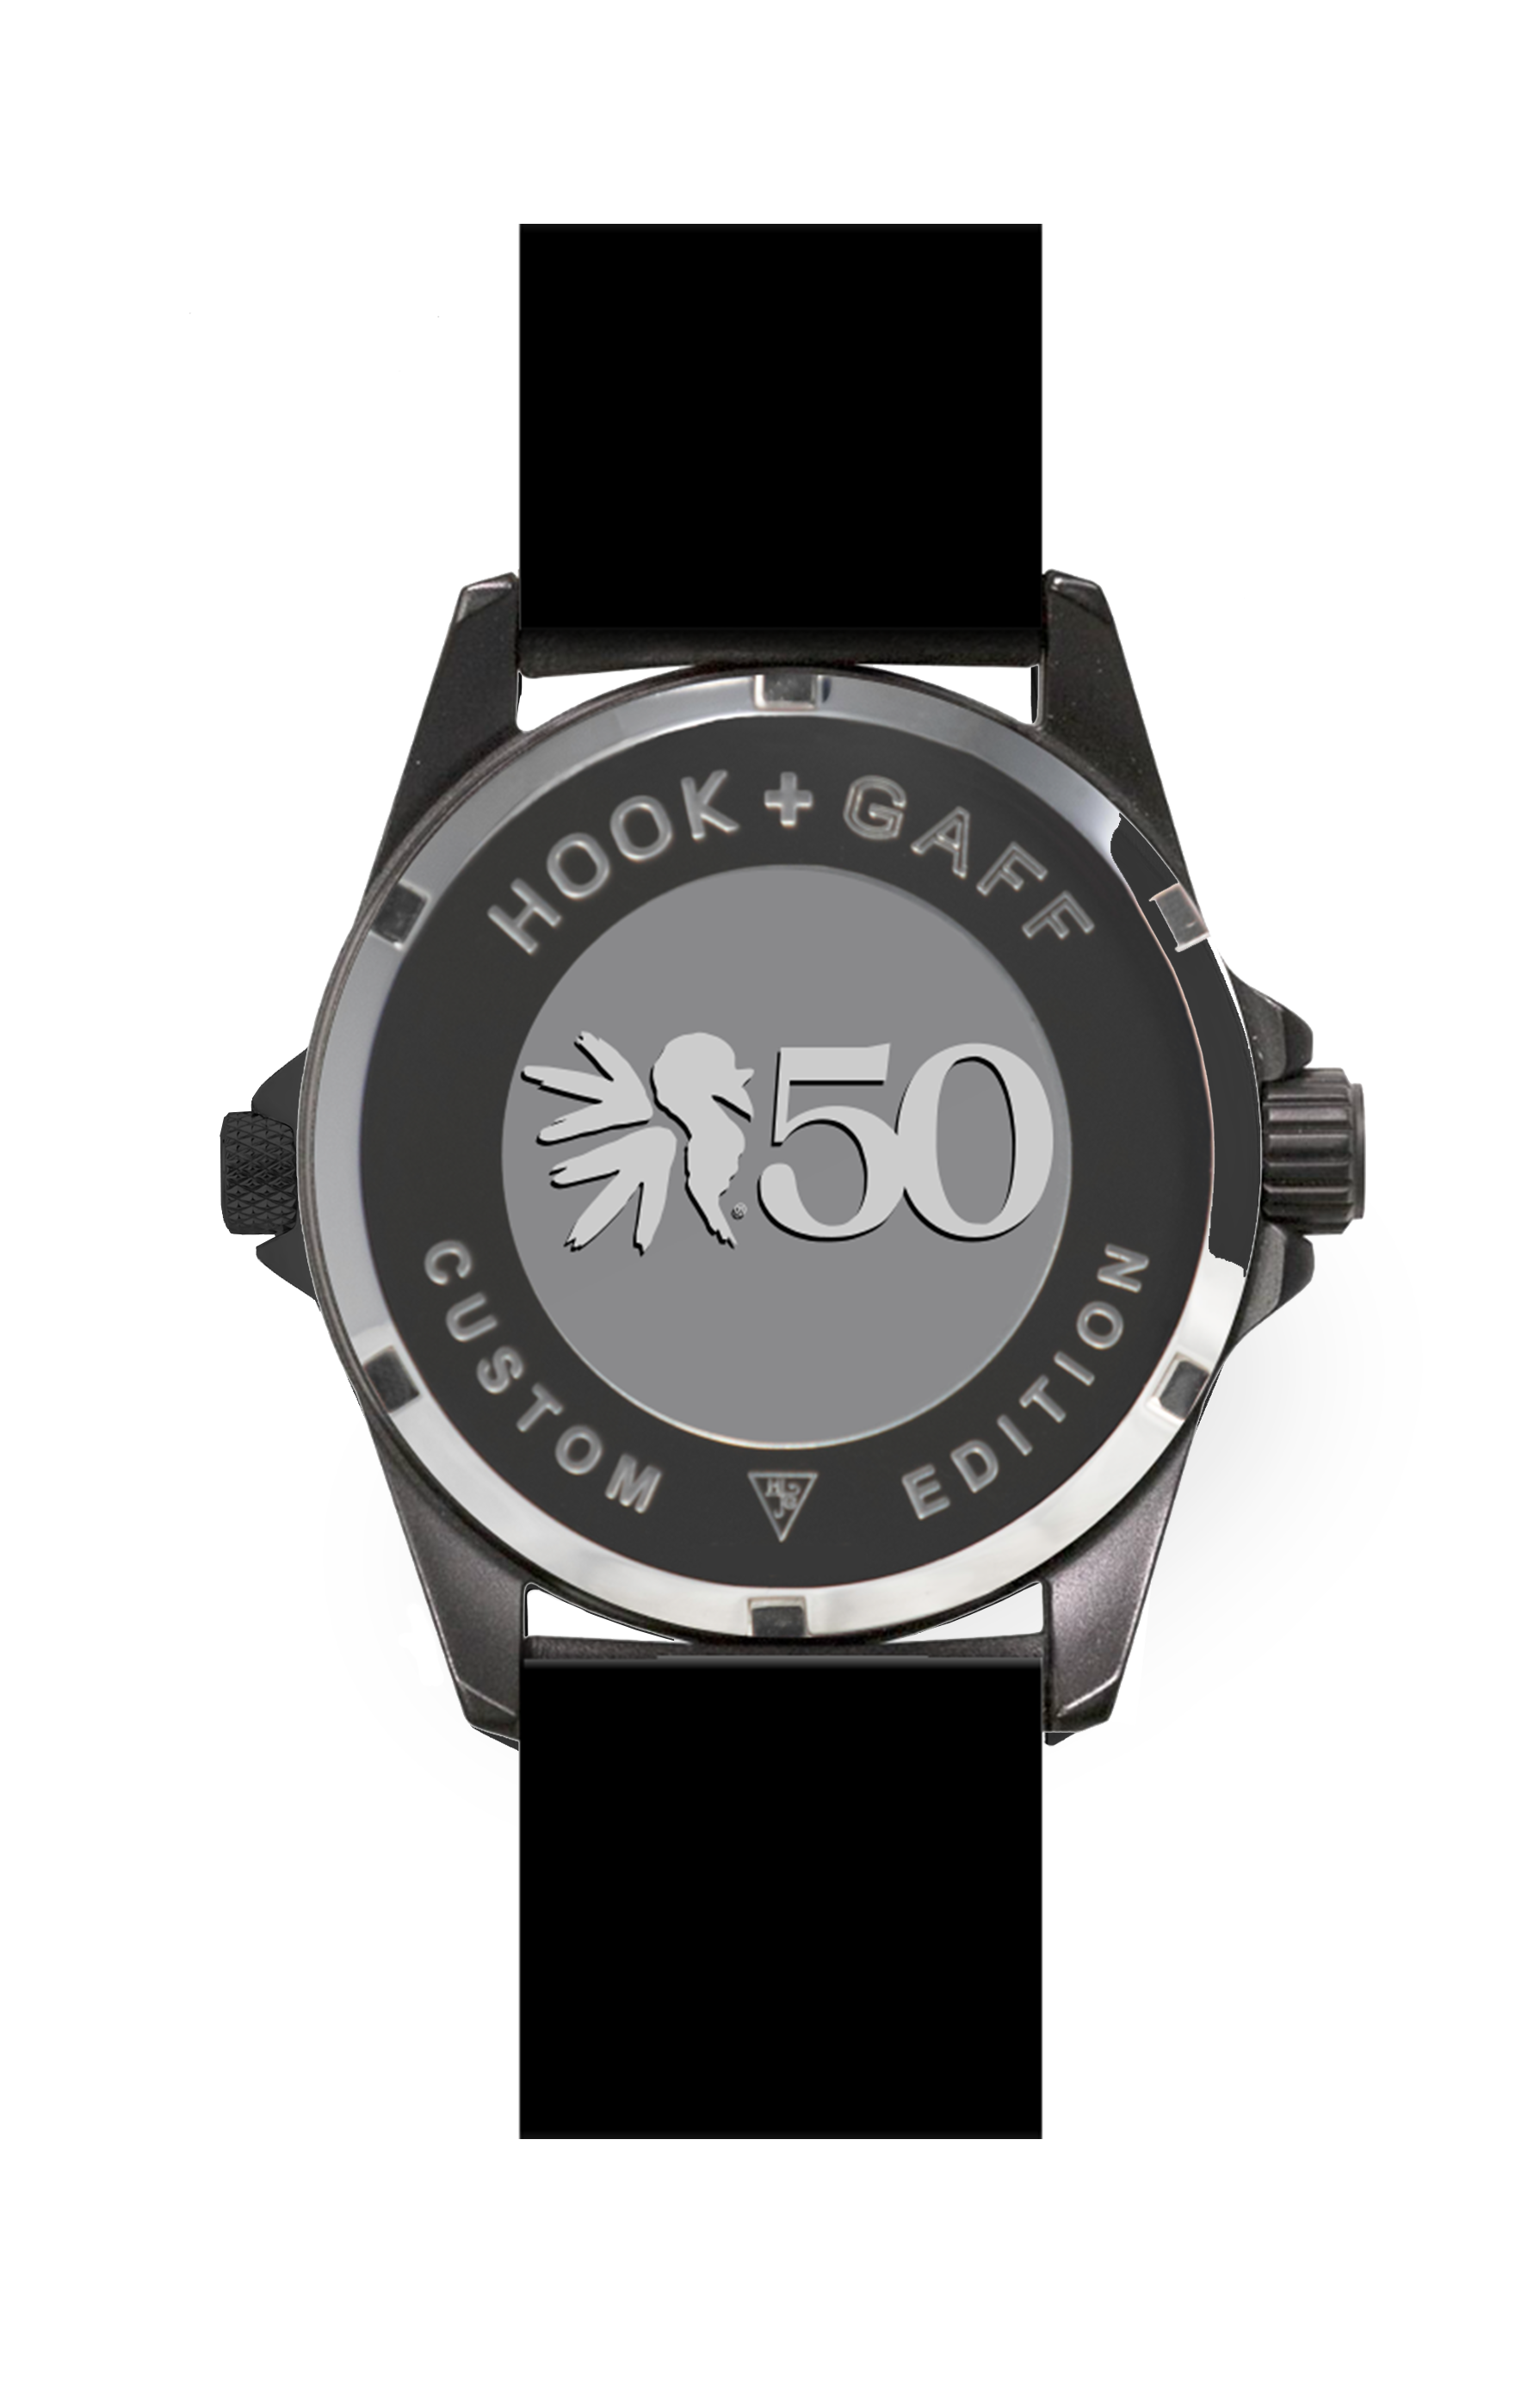 Hook + Gaff Watch Company - Versatile, durable, functionalmade for the  outdoors! Check out the new Field Watches and get prepared for hunting  season, to learn more visit